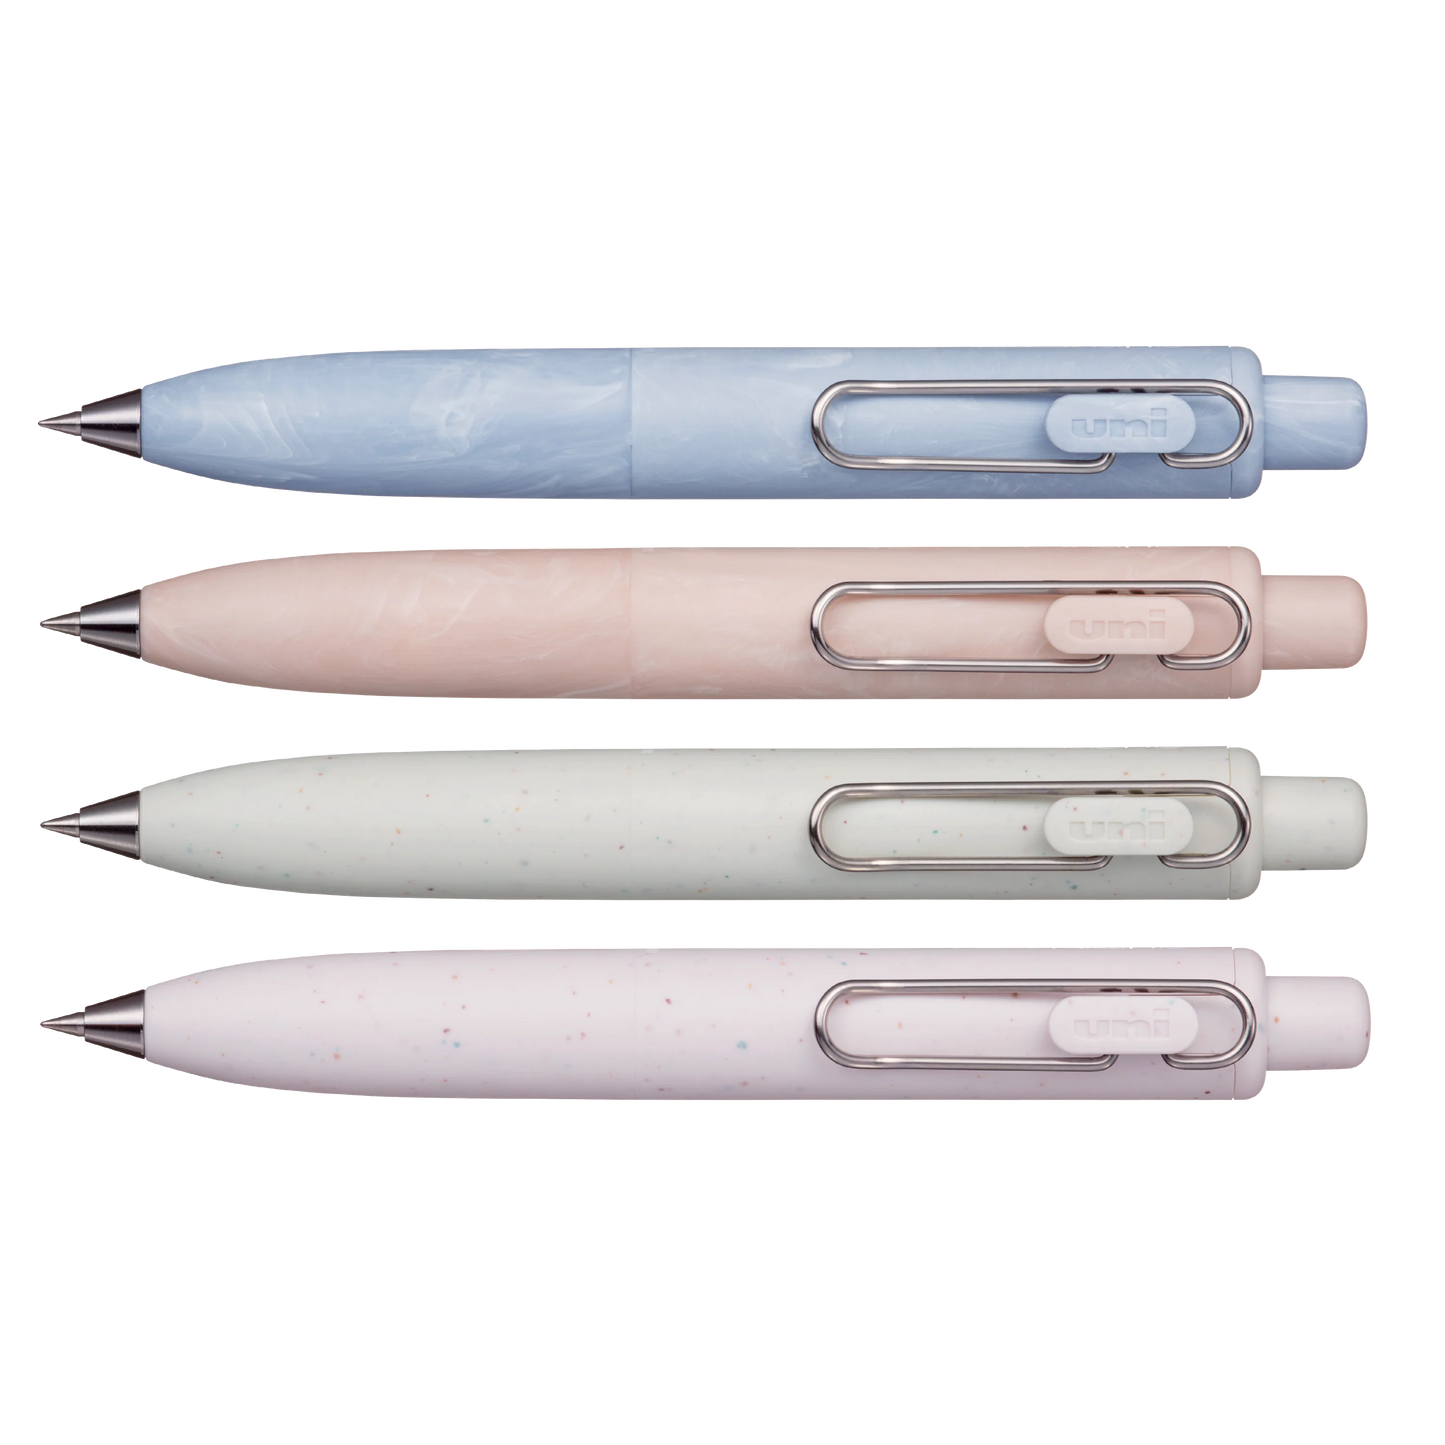 Uni-ball One P Gel Pen - Bath Bomb Collection - Limited Edition